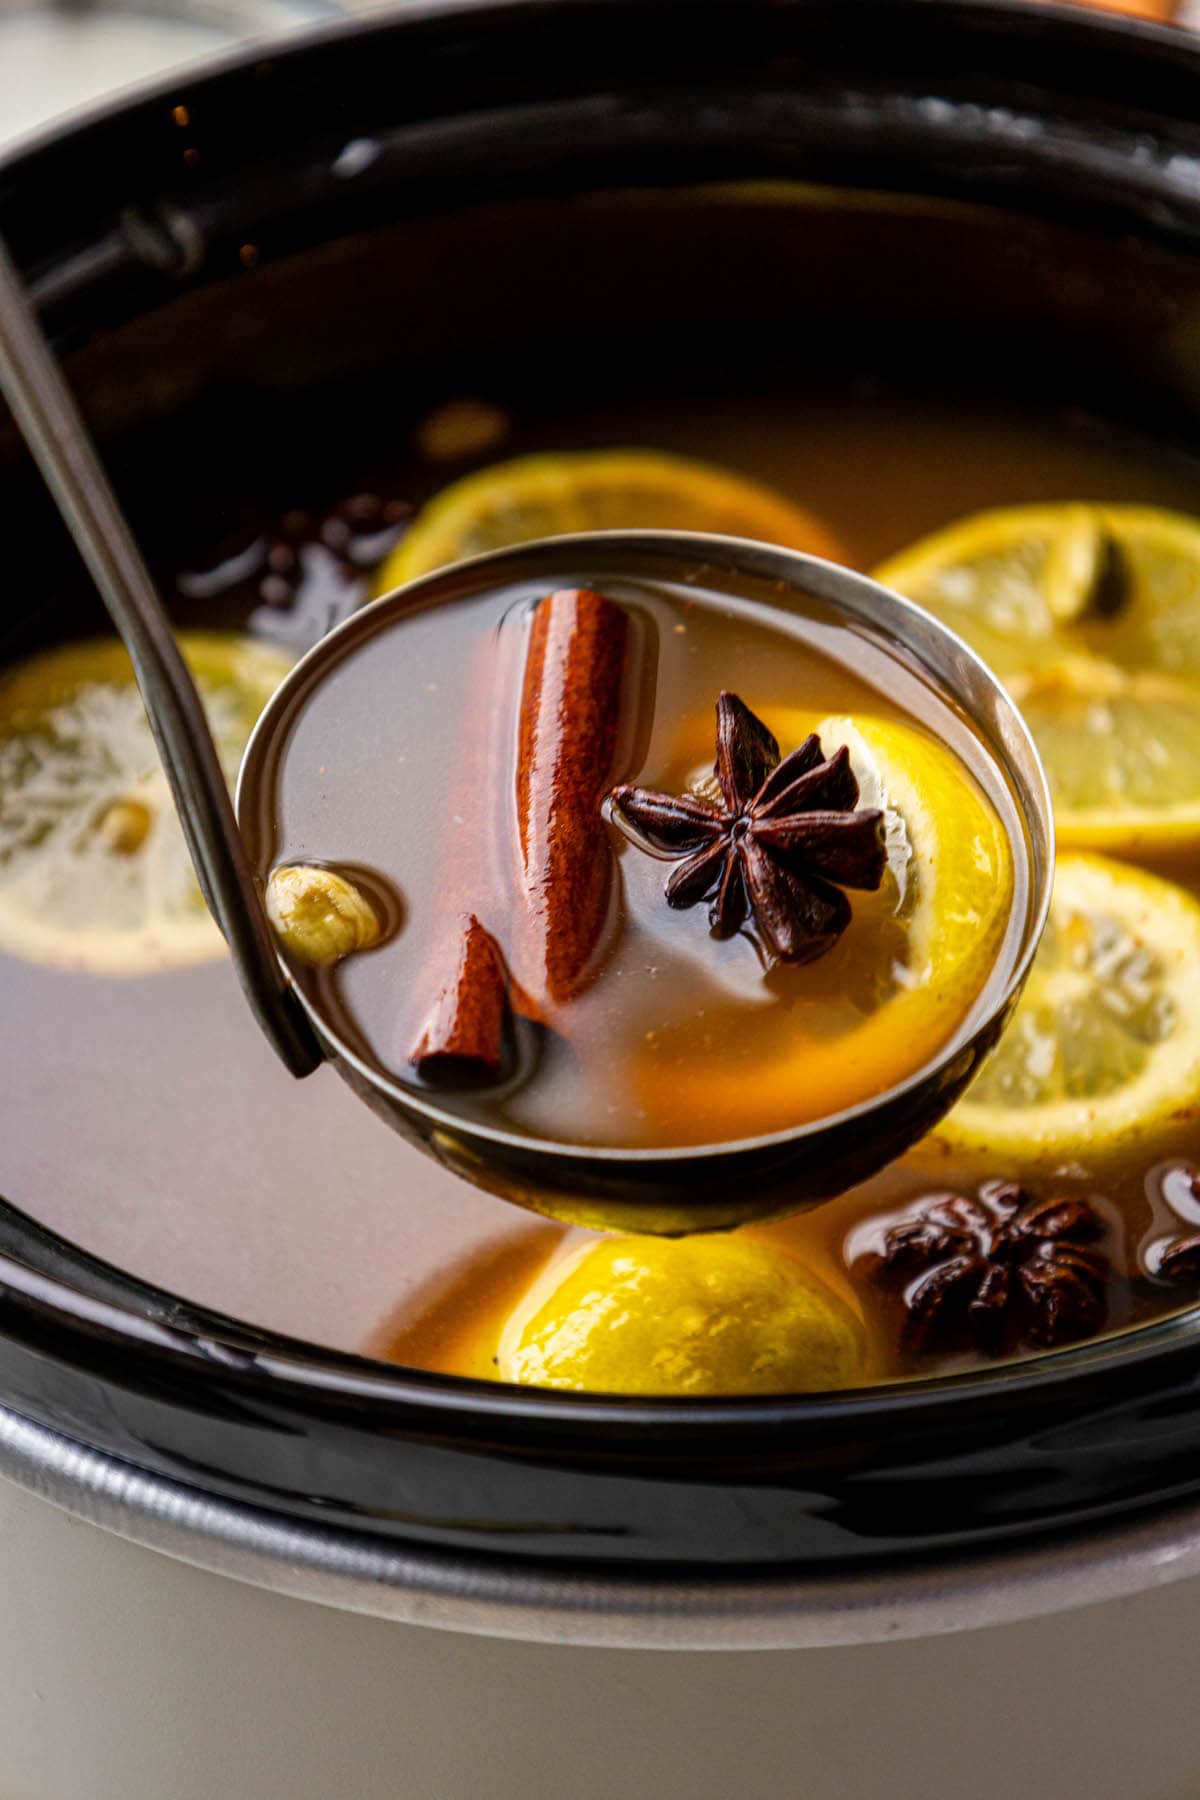 A warm and flavorful concoction of mulled cider infused with cinnamon sticks and orange slices.